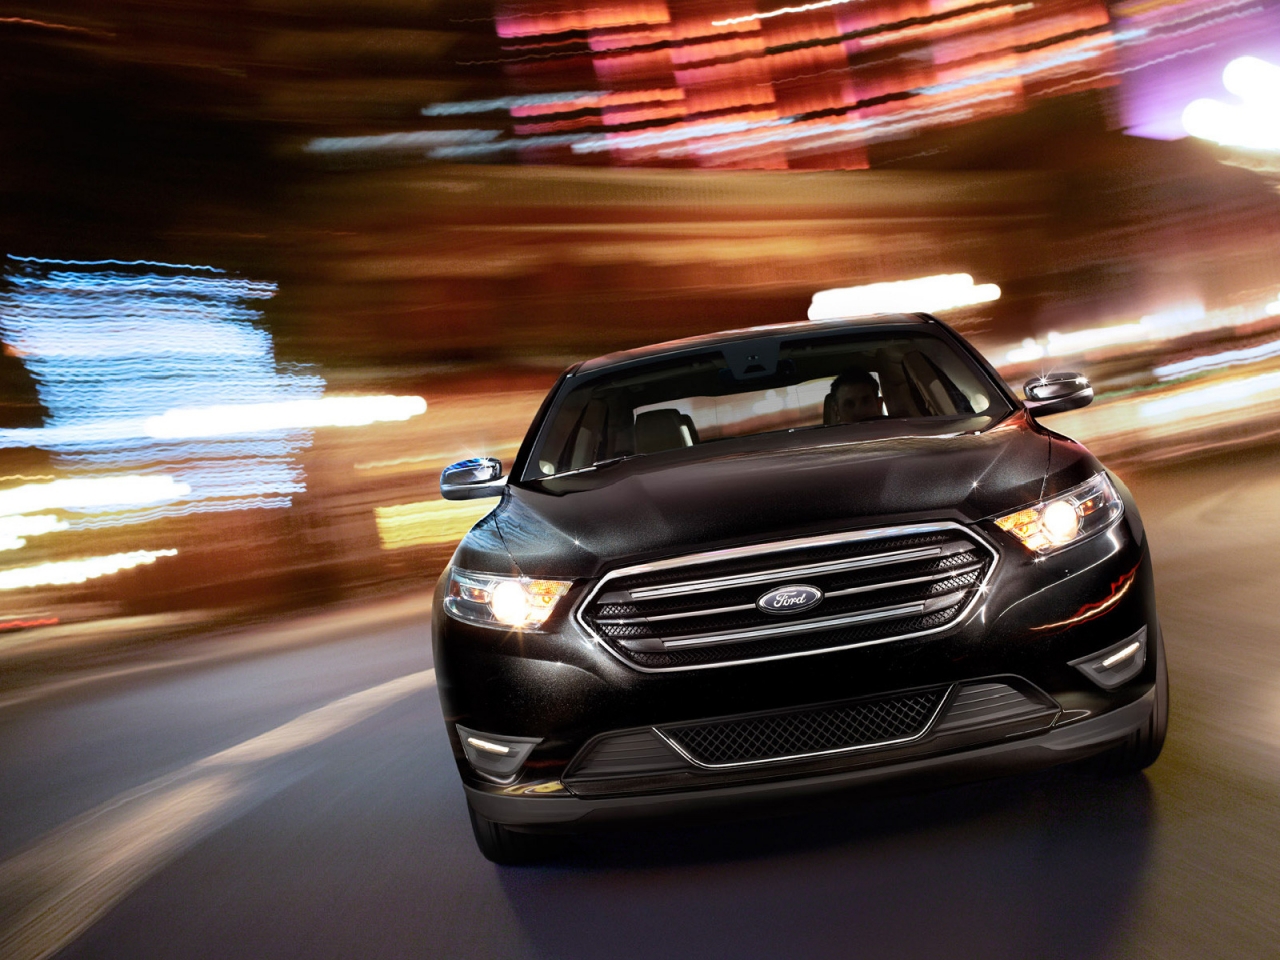 2013 Ford Taurus Limited for 1280 x 960 resolution